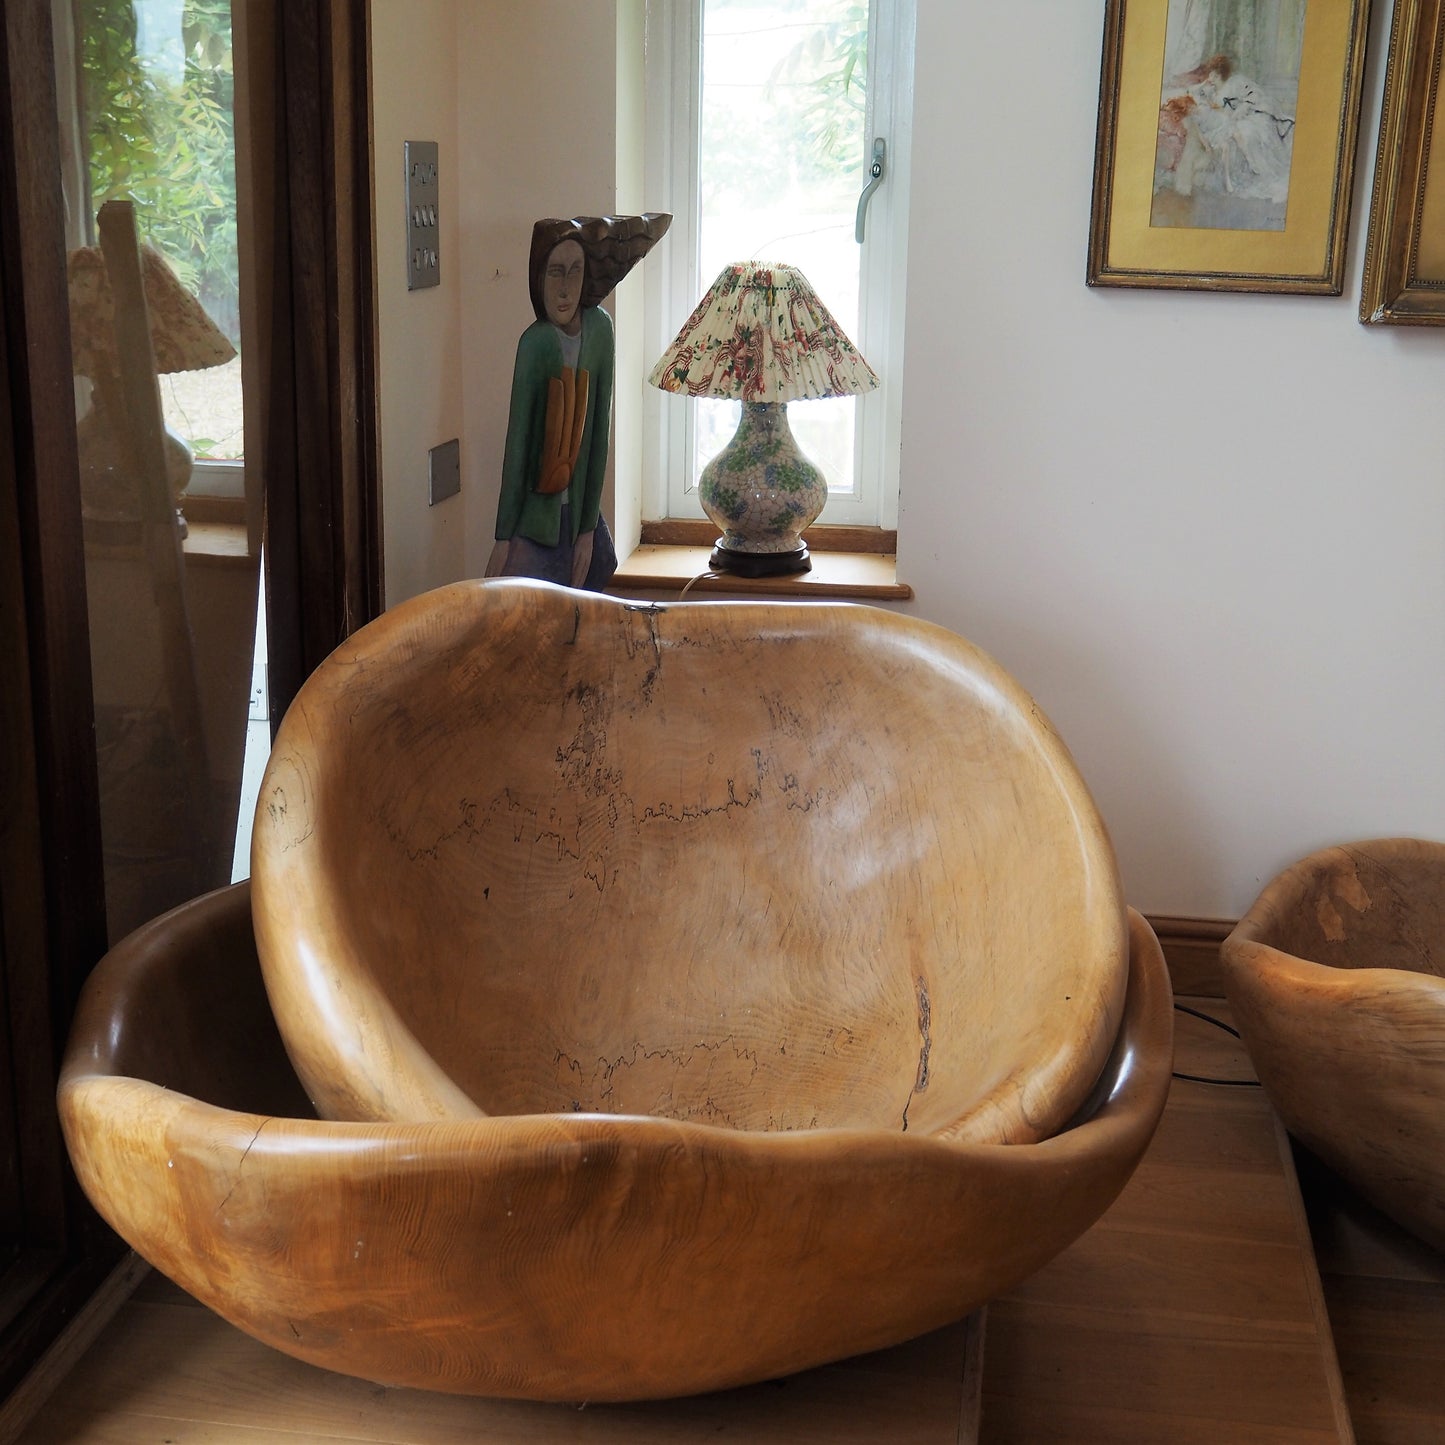 Caton, Paul - Hand Carved Wooden Bowls